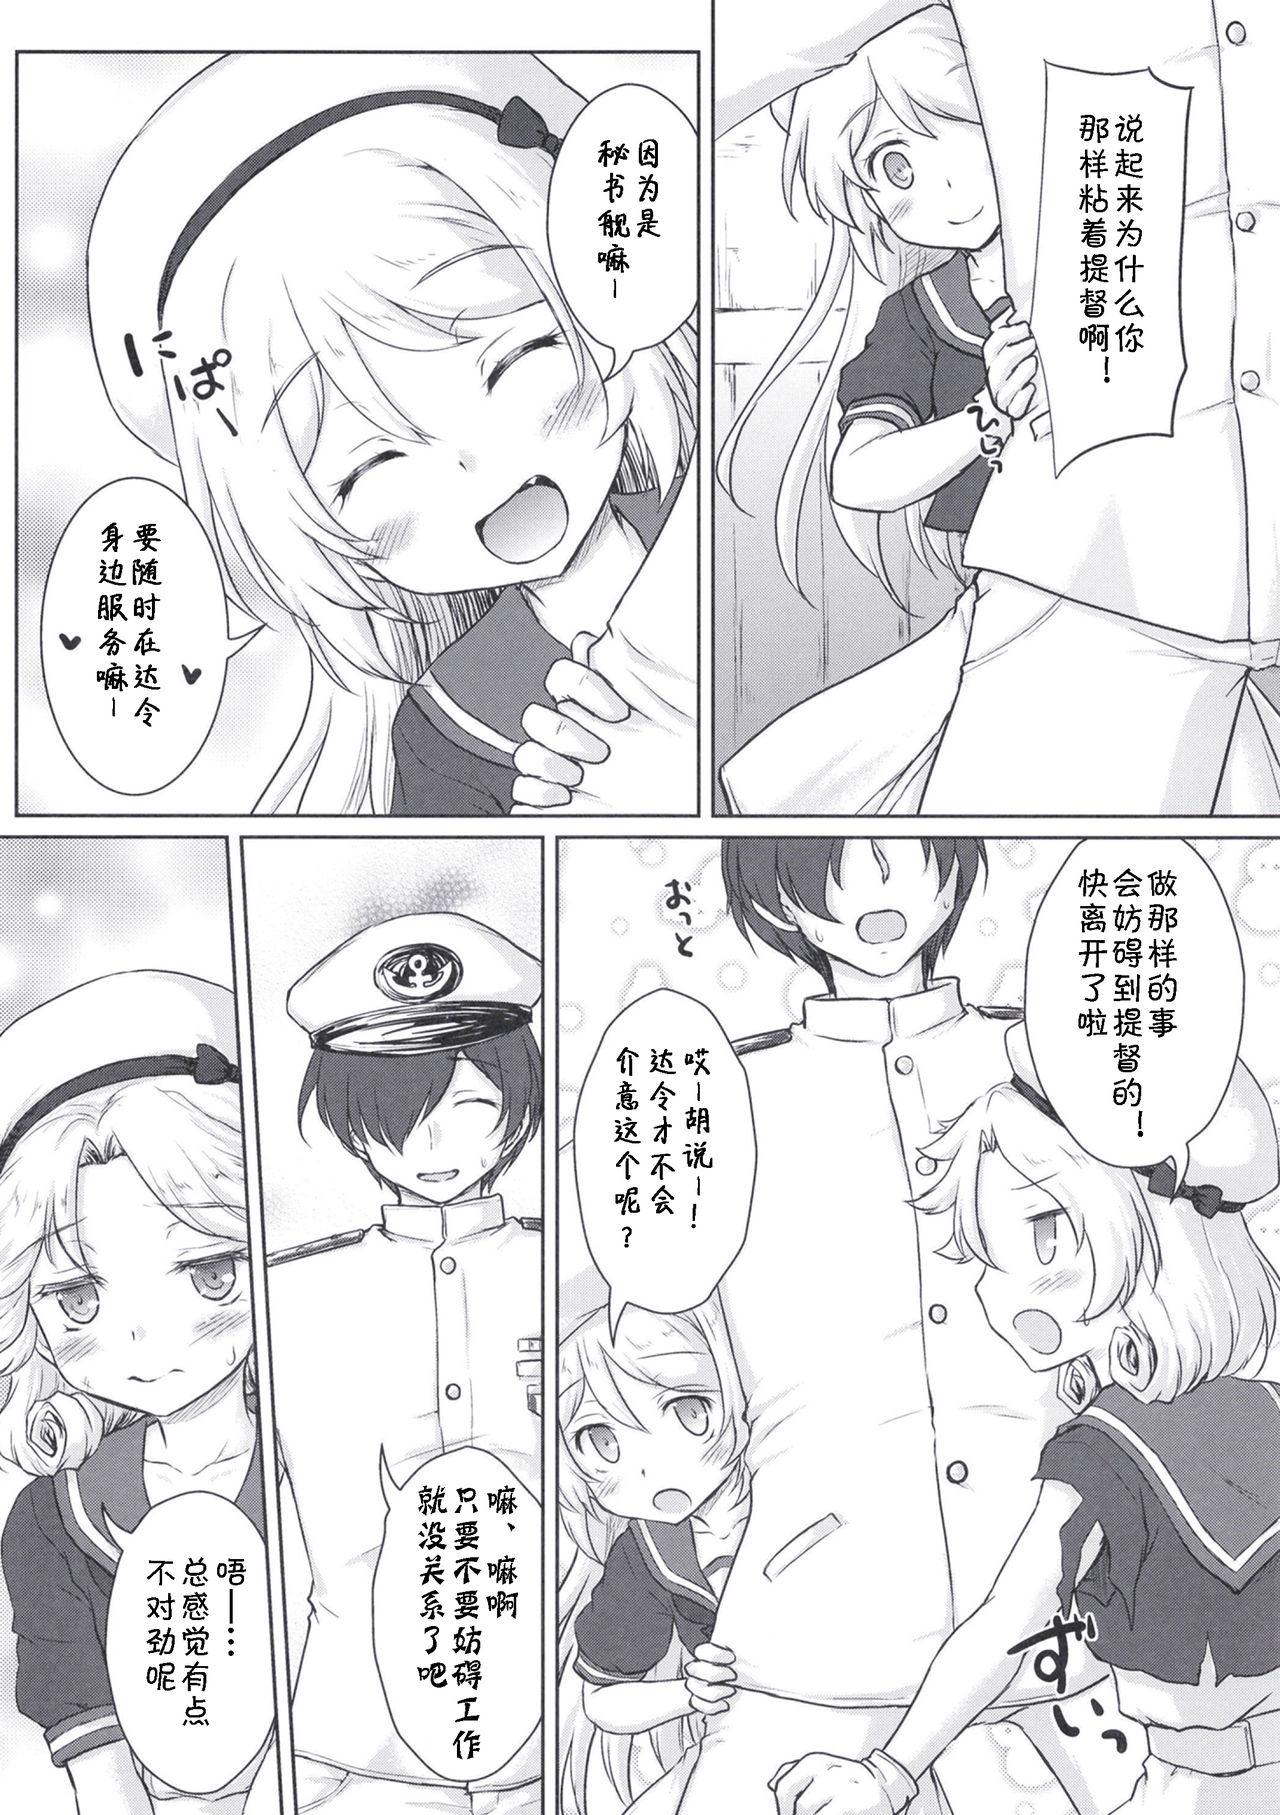 Hijab Darling is in sight! act2 - Kantai collection Tanned - Page 7